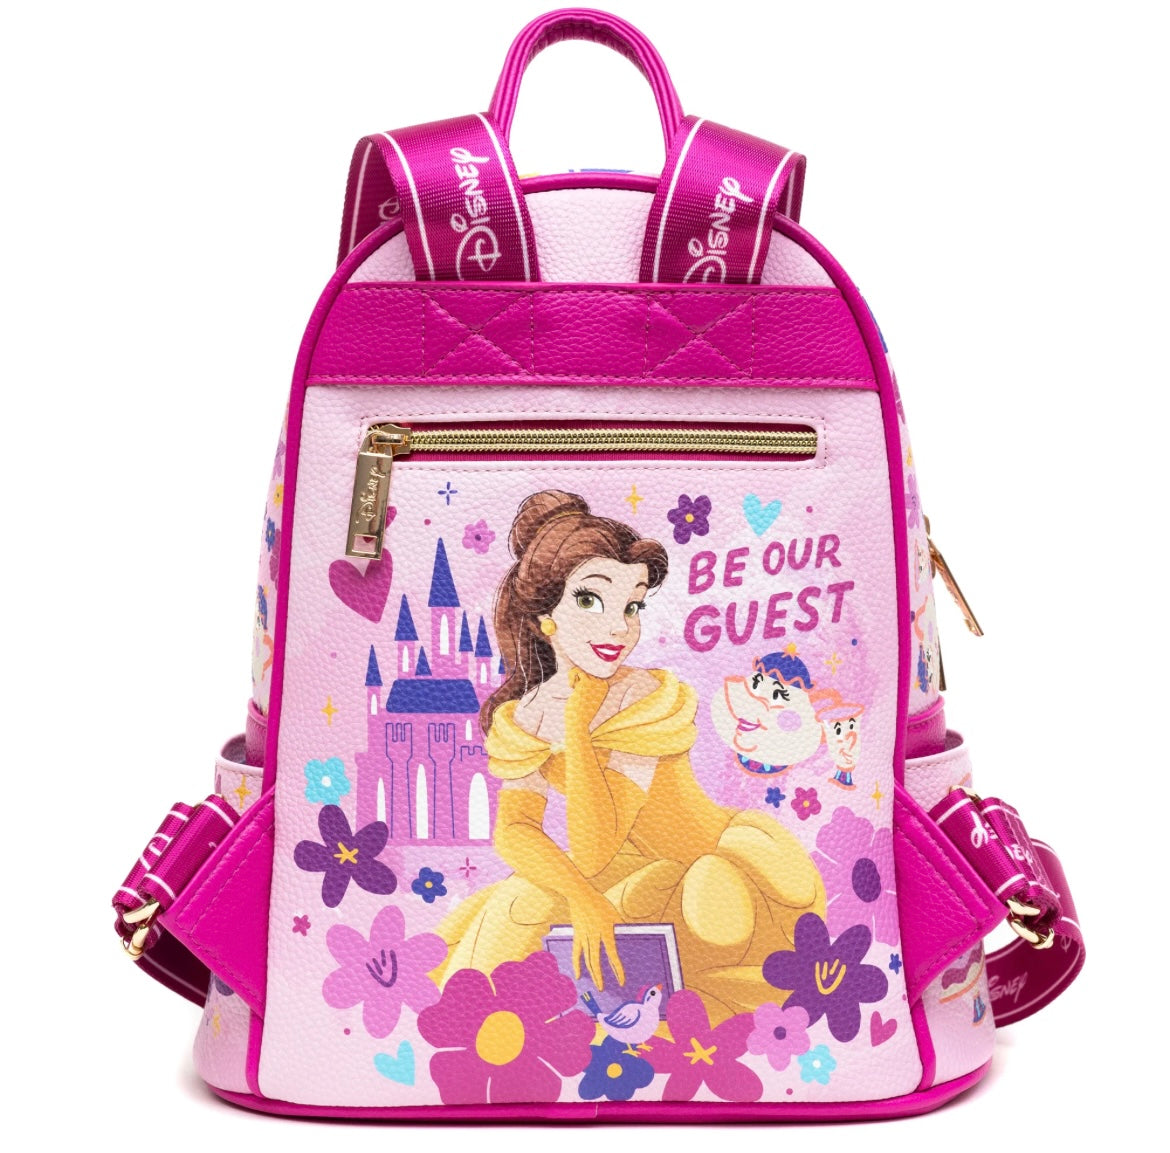 WondaPOP - Beauty and the Beast - Belle - 11 Inch Vegan Leather Mini Backpack